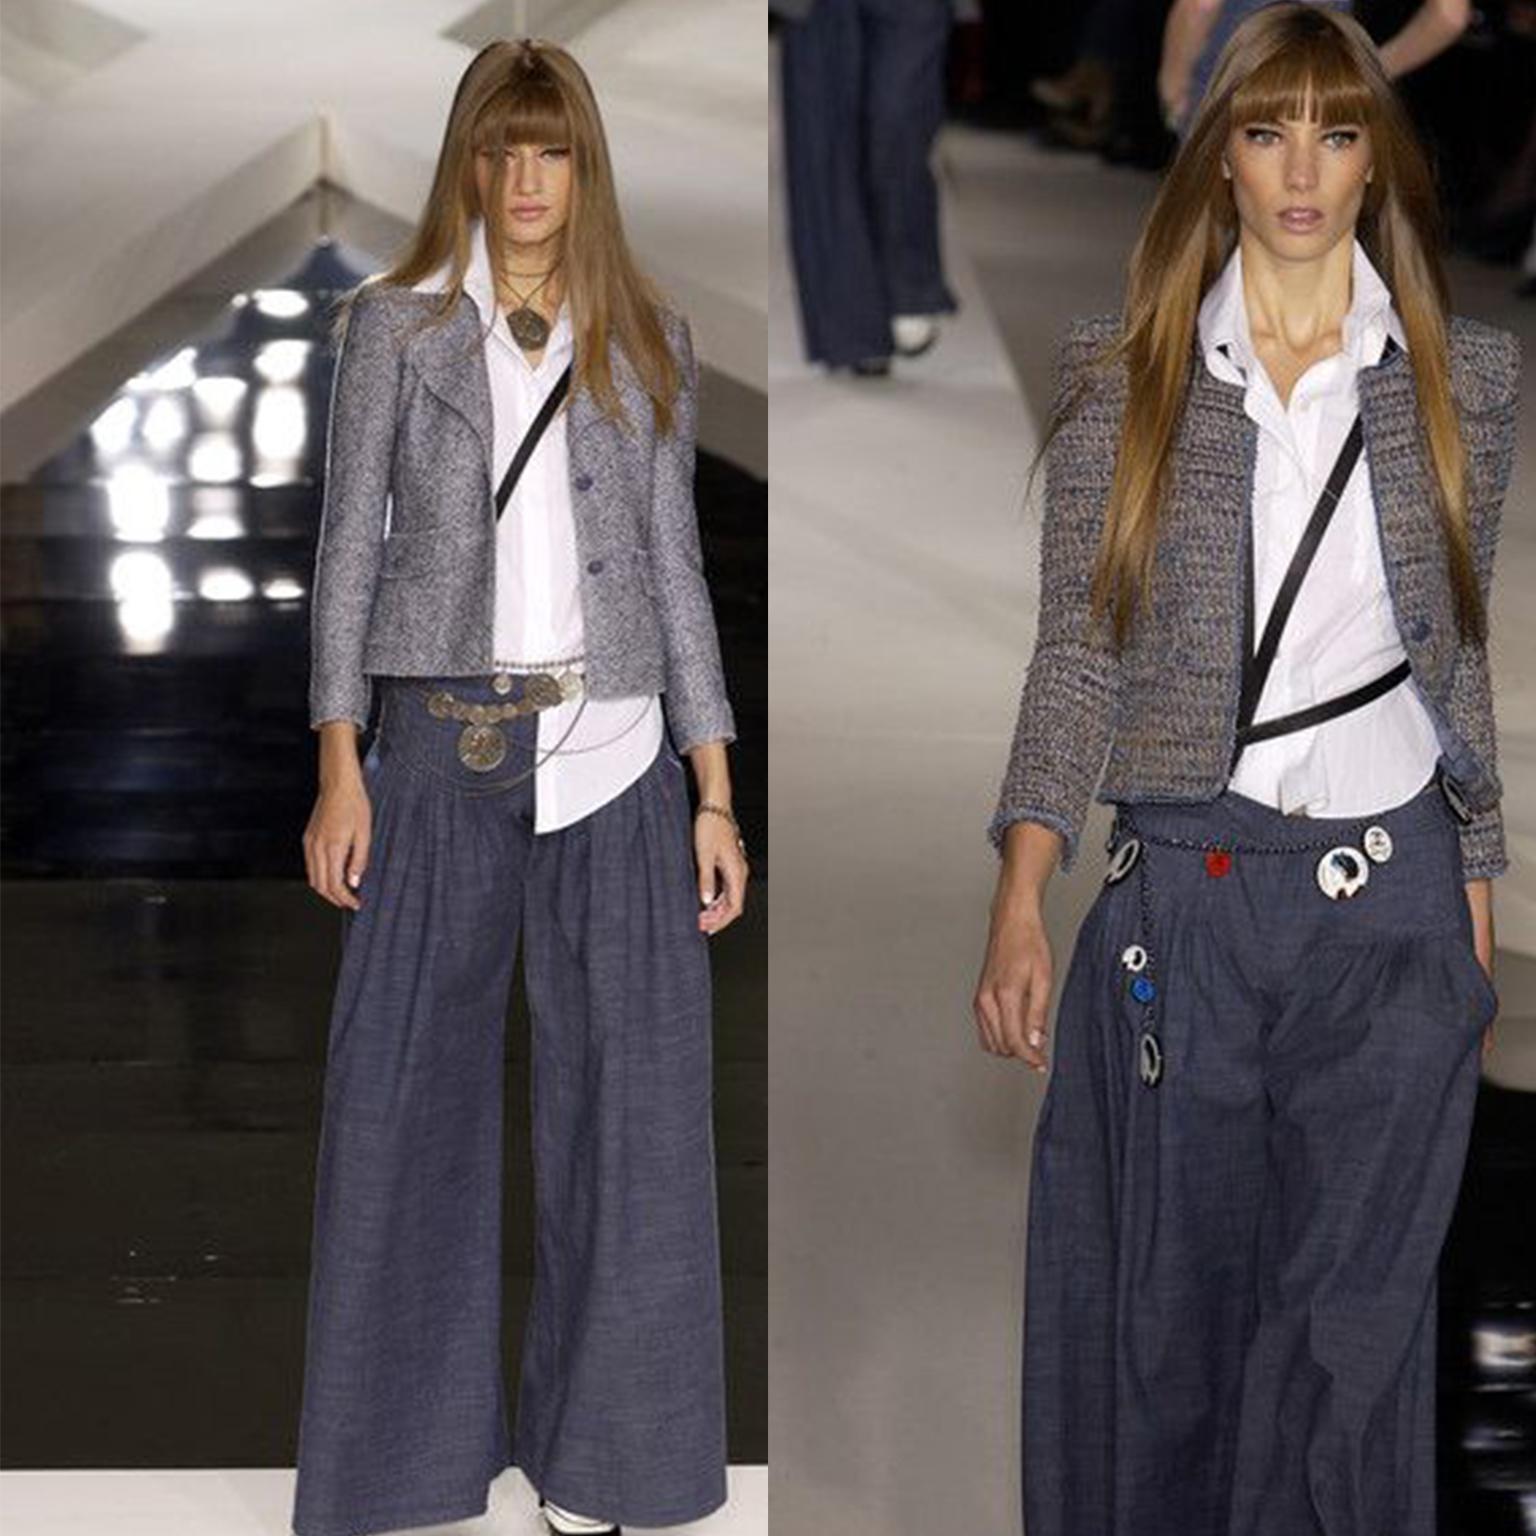 This is a documented pair of pleated grey/blue lightweight denim trousers from the Spring 2003 Chanel runway collection. These are quintessential early 2000's vintage pants and we love the super wide legs! The color is a medium wash with a greyish